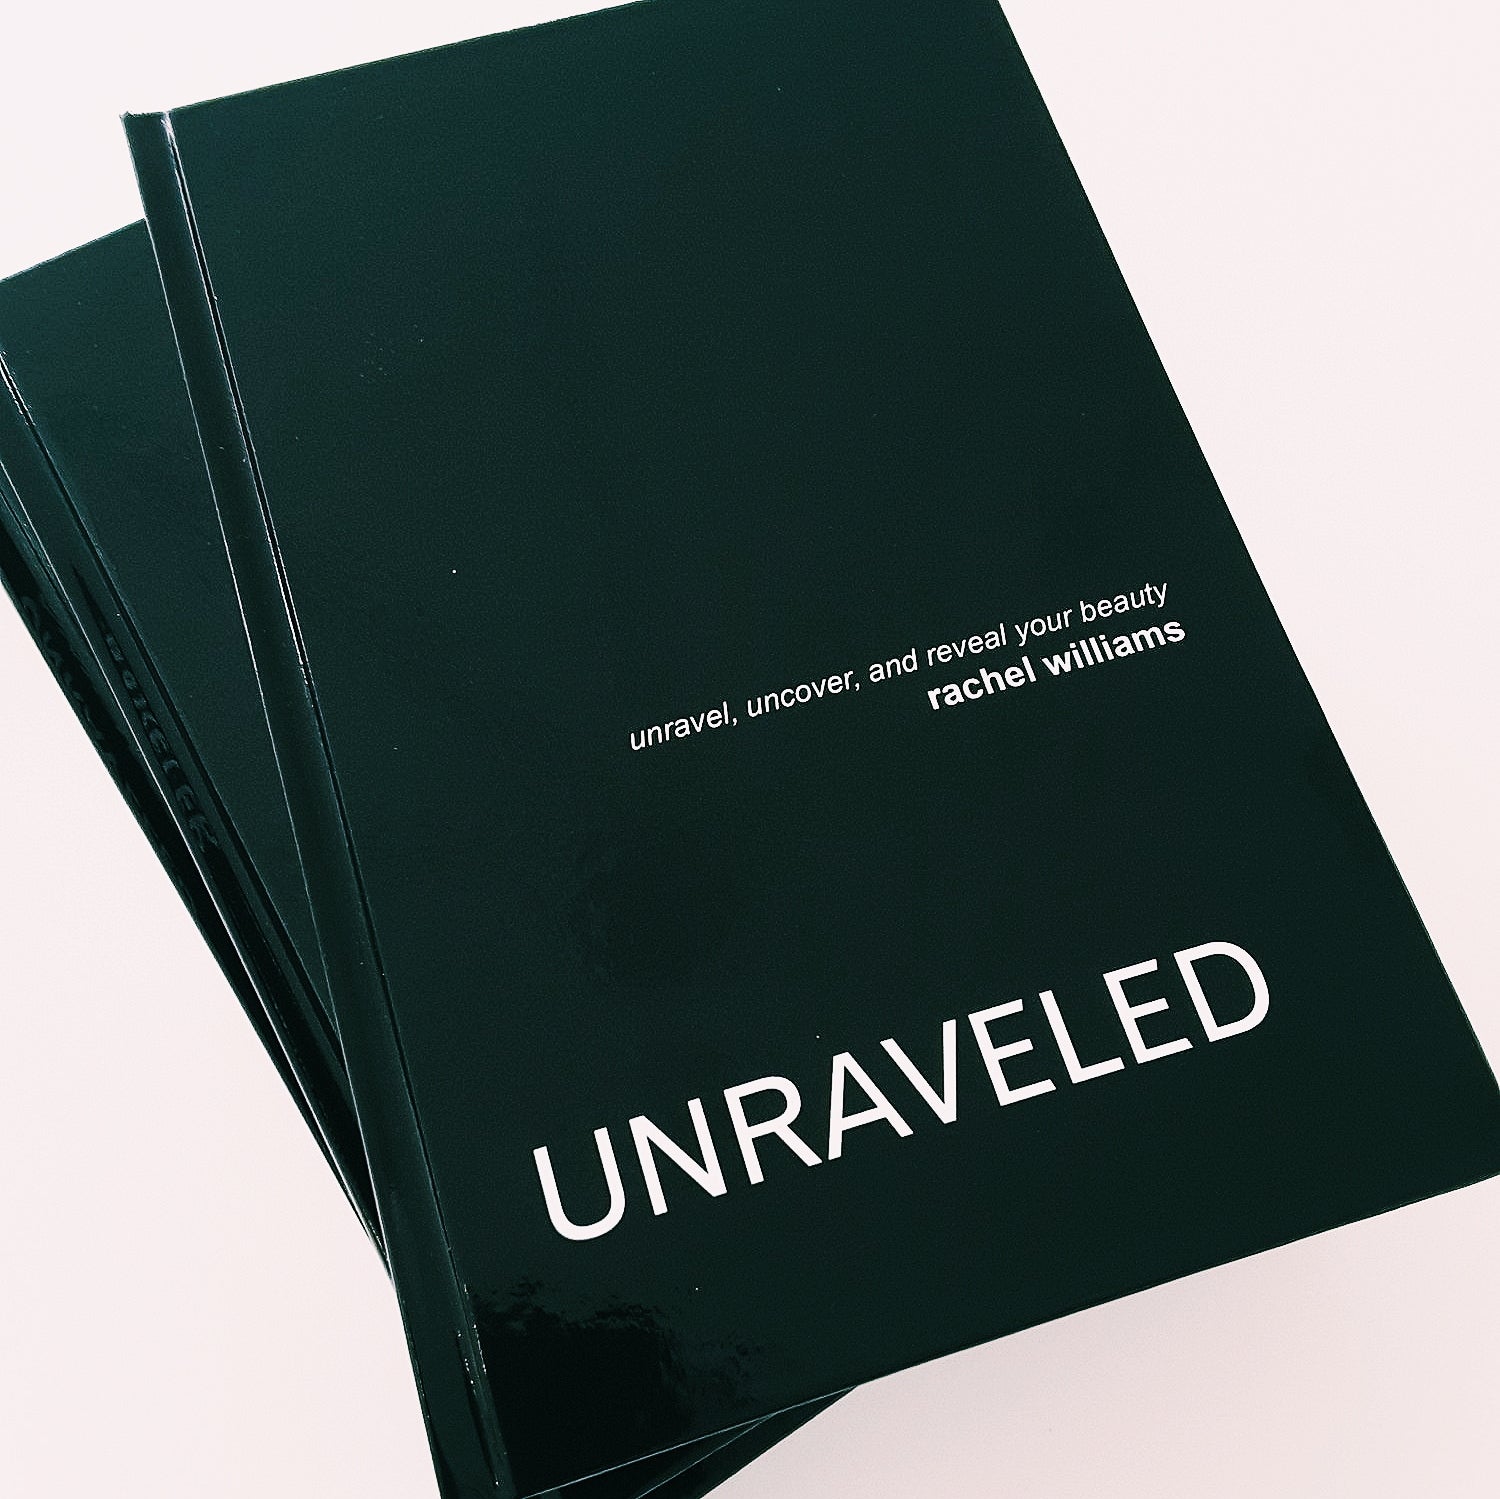 
  
  Unraveled: unravel, uncover, and reveal your beauty- LORDE beauty and cosmetics
  
